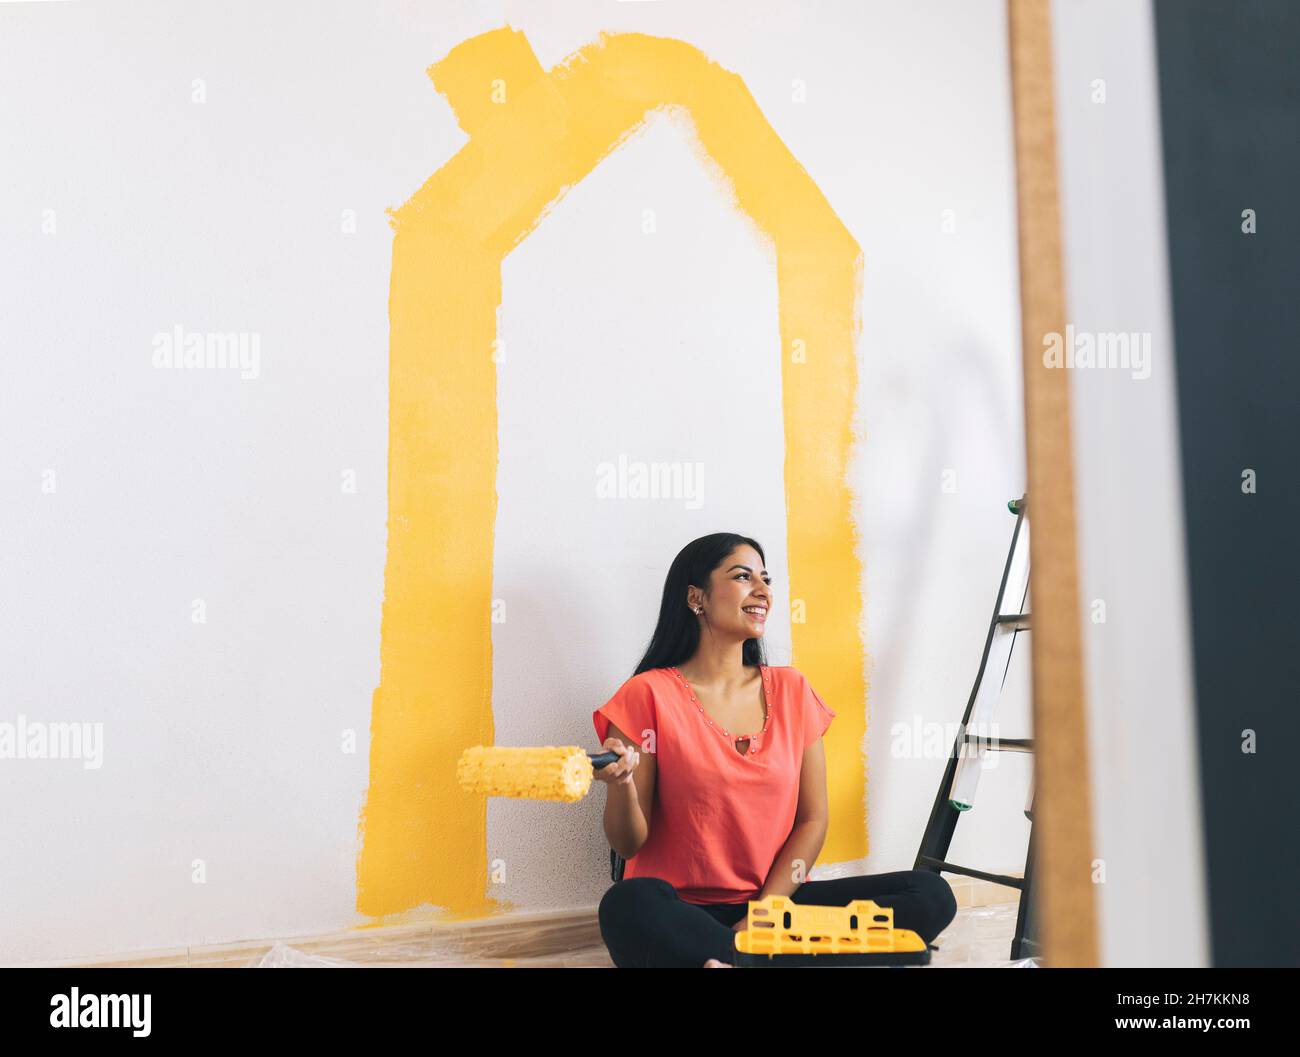 Smiling young woman painting wall at home Banque D'Images